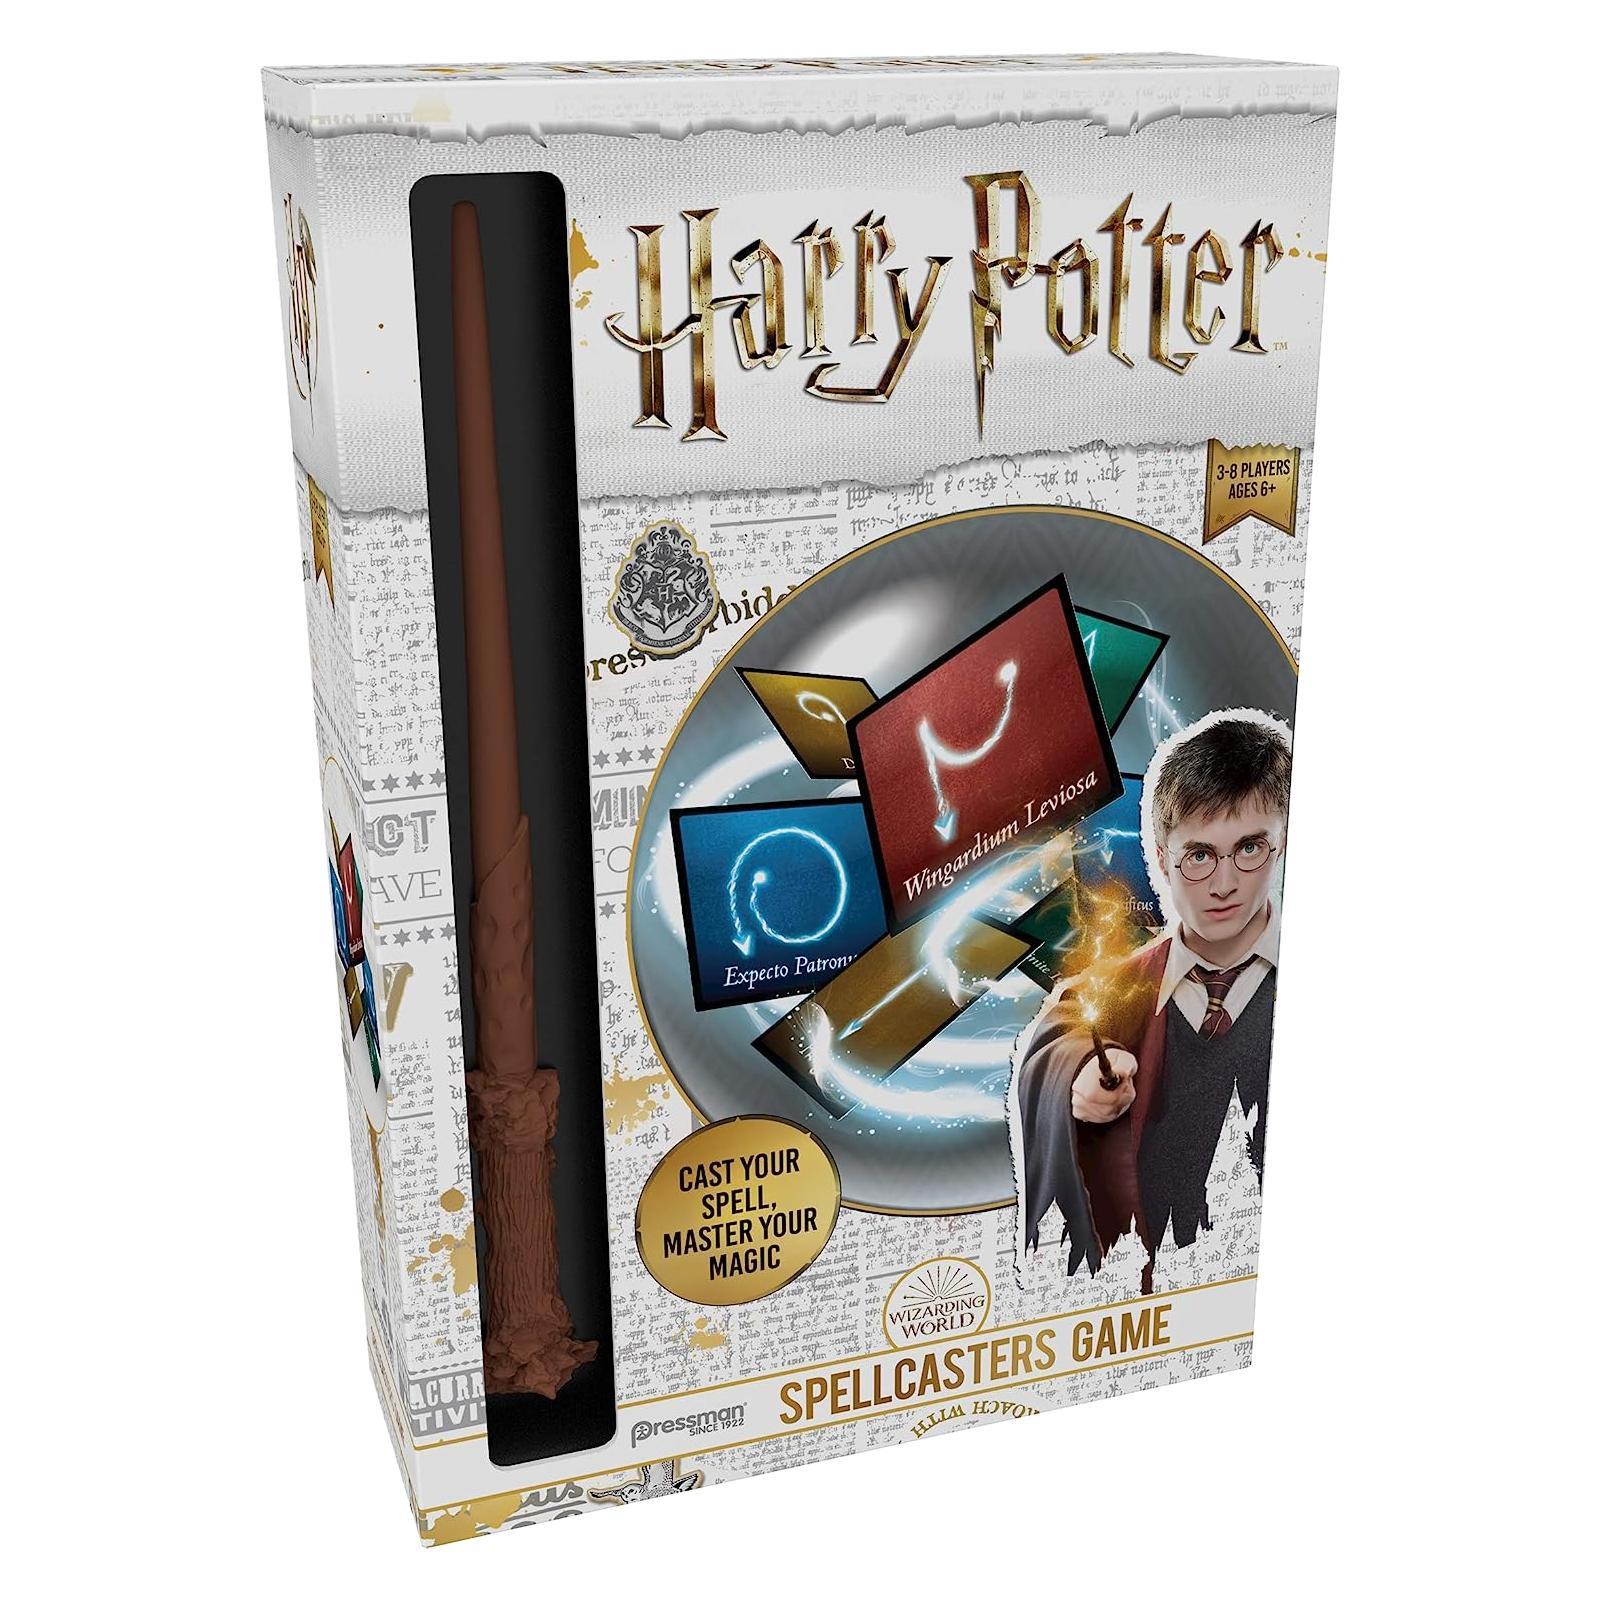 Goliath Games Harry Potter Spellcasters Wand A Charade Game